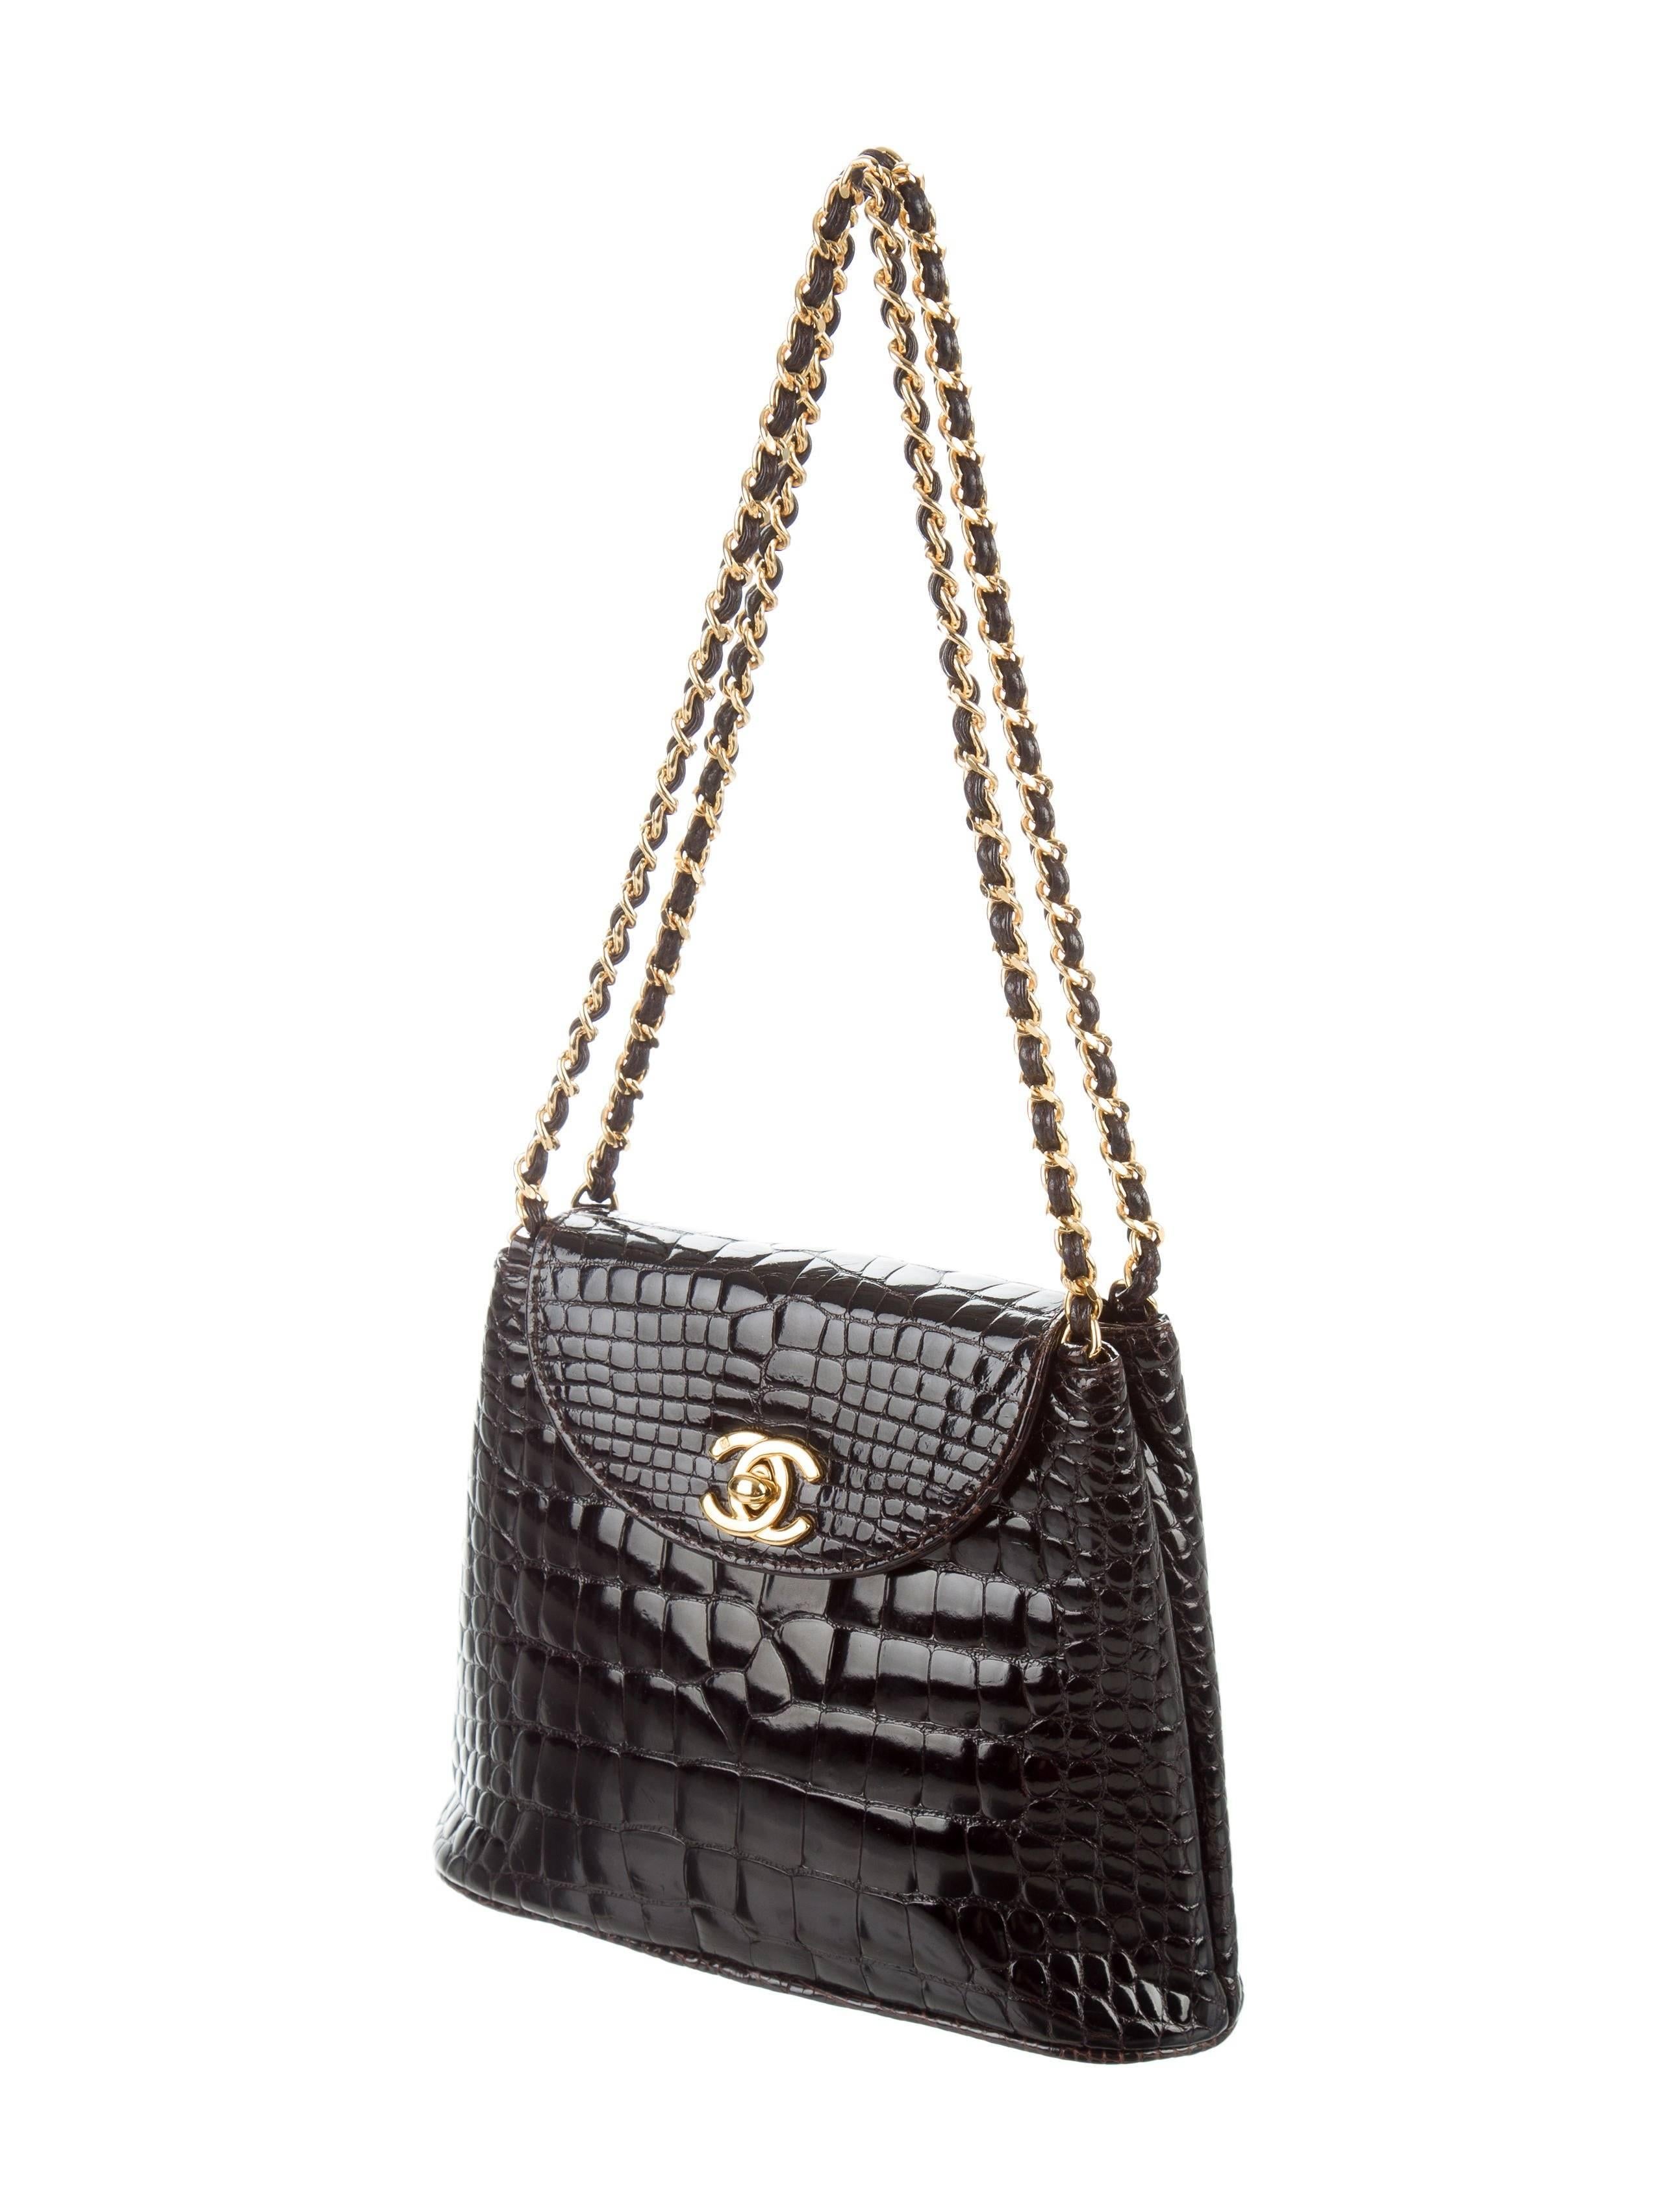 CURATOR'S NOTES

Chanel Dark Chocolate Crocodile CC Clutch Evening Satchel Flap Bag W/Accessories  

Crocodile 
Gold tone hardware
Leather lining
Turn lock closure 
Date code present 
Includes original Chanel authenticity card and dust bag
Shoulder